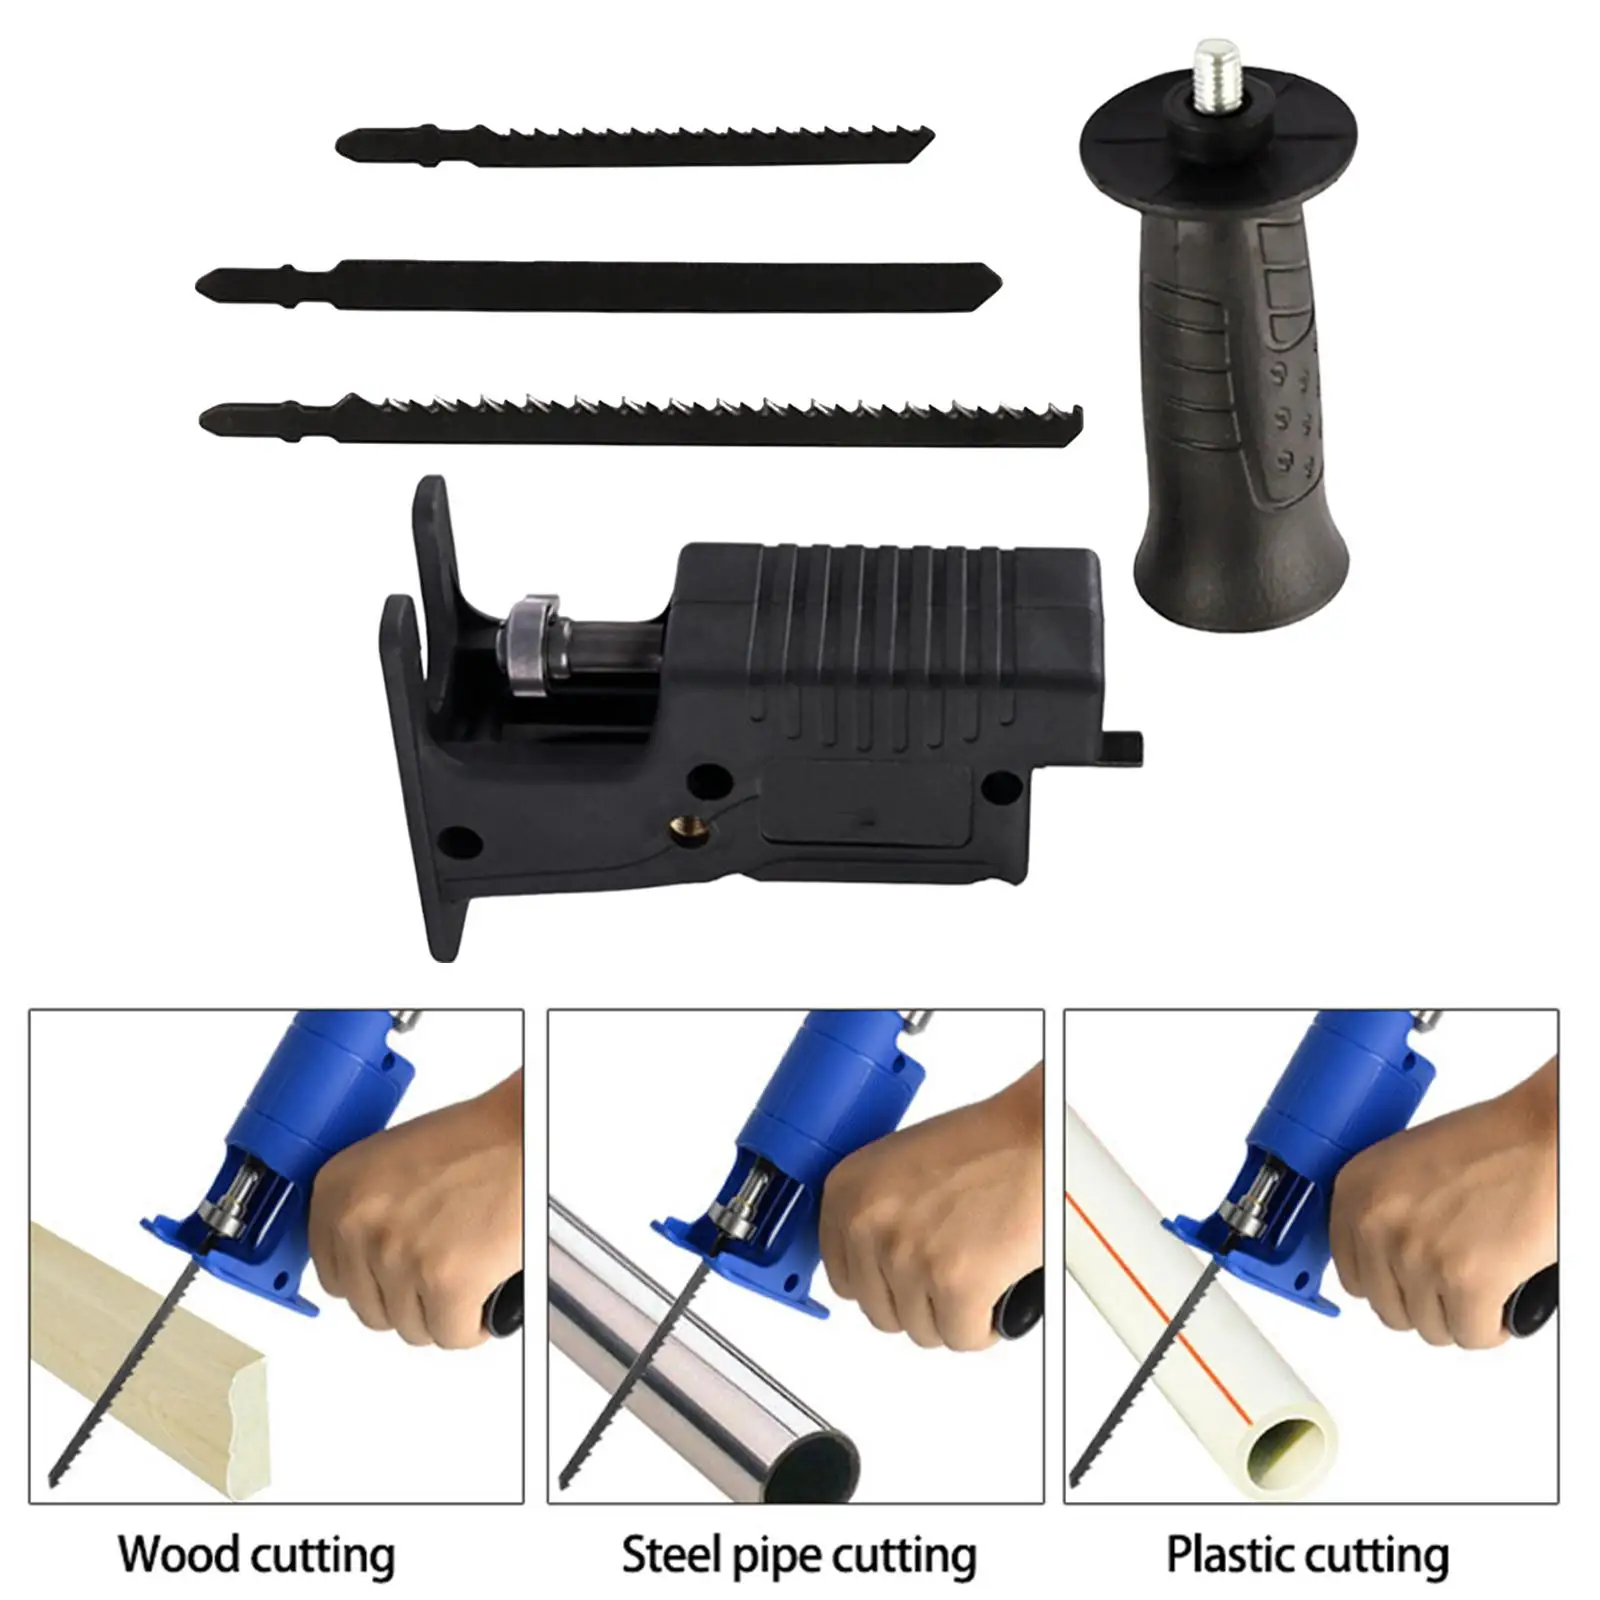 Saw Attachment for Drill Ergonomic Handle Electric Drill Modified Tool Attachment Reciprocating Saw Adapter for PVC Pipe Metal